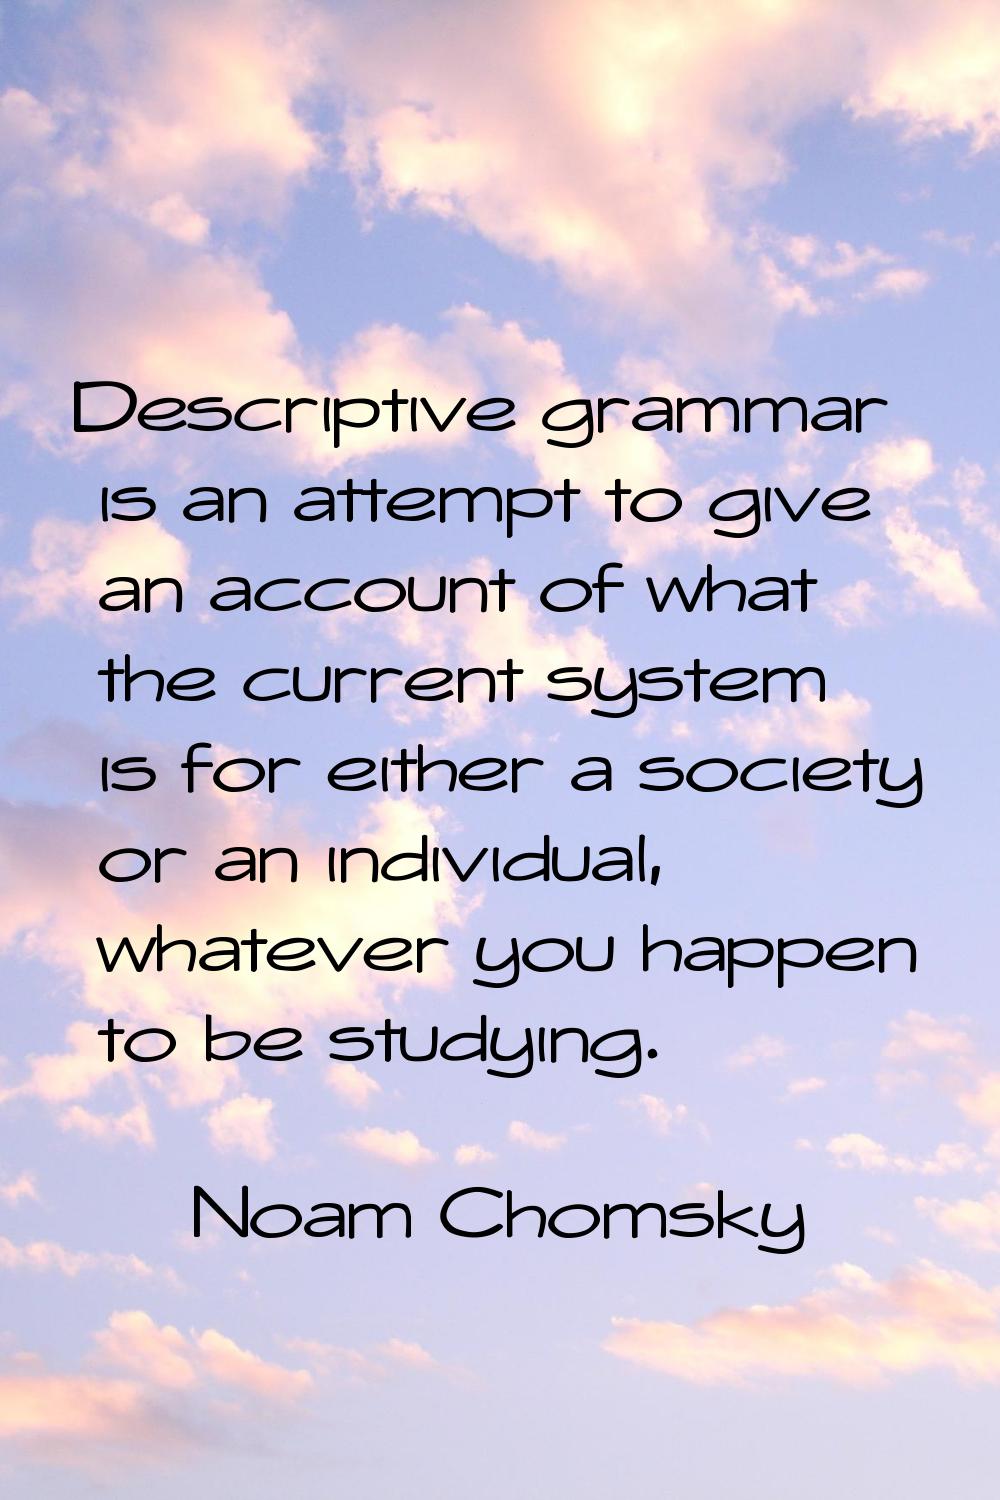 Descriptive grammar is an attempt to give an account of what the current system is for either a soc